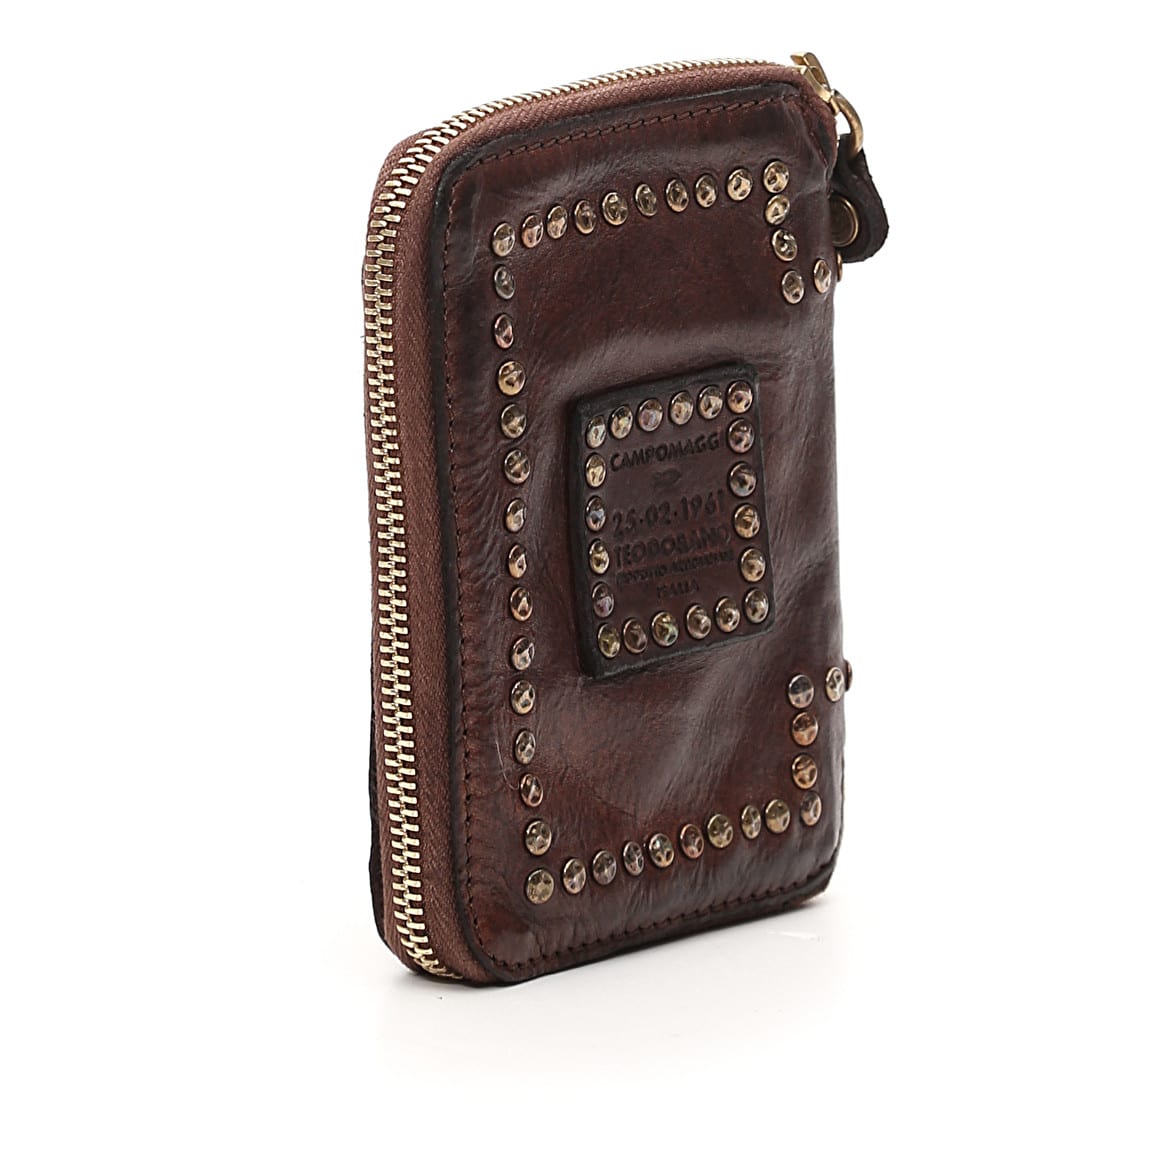 Campomaggi leather wallet with rivets